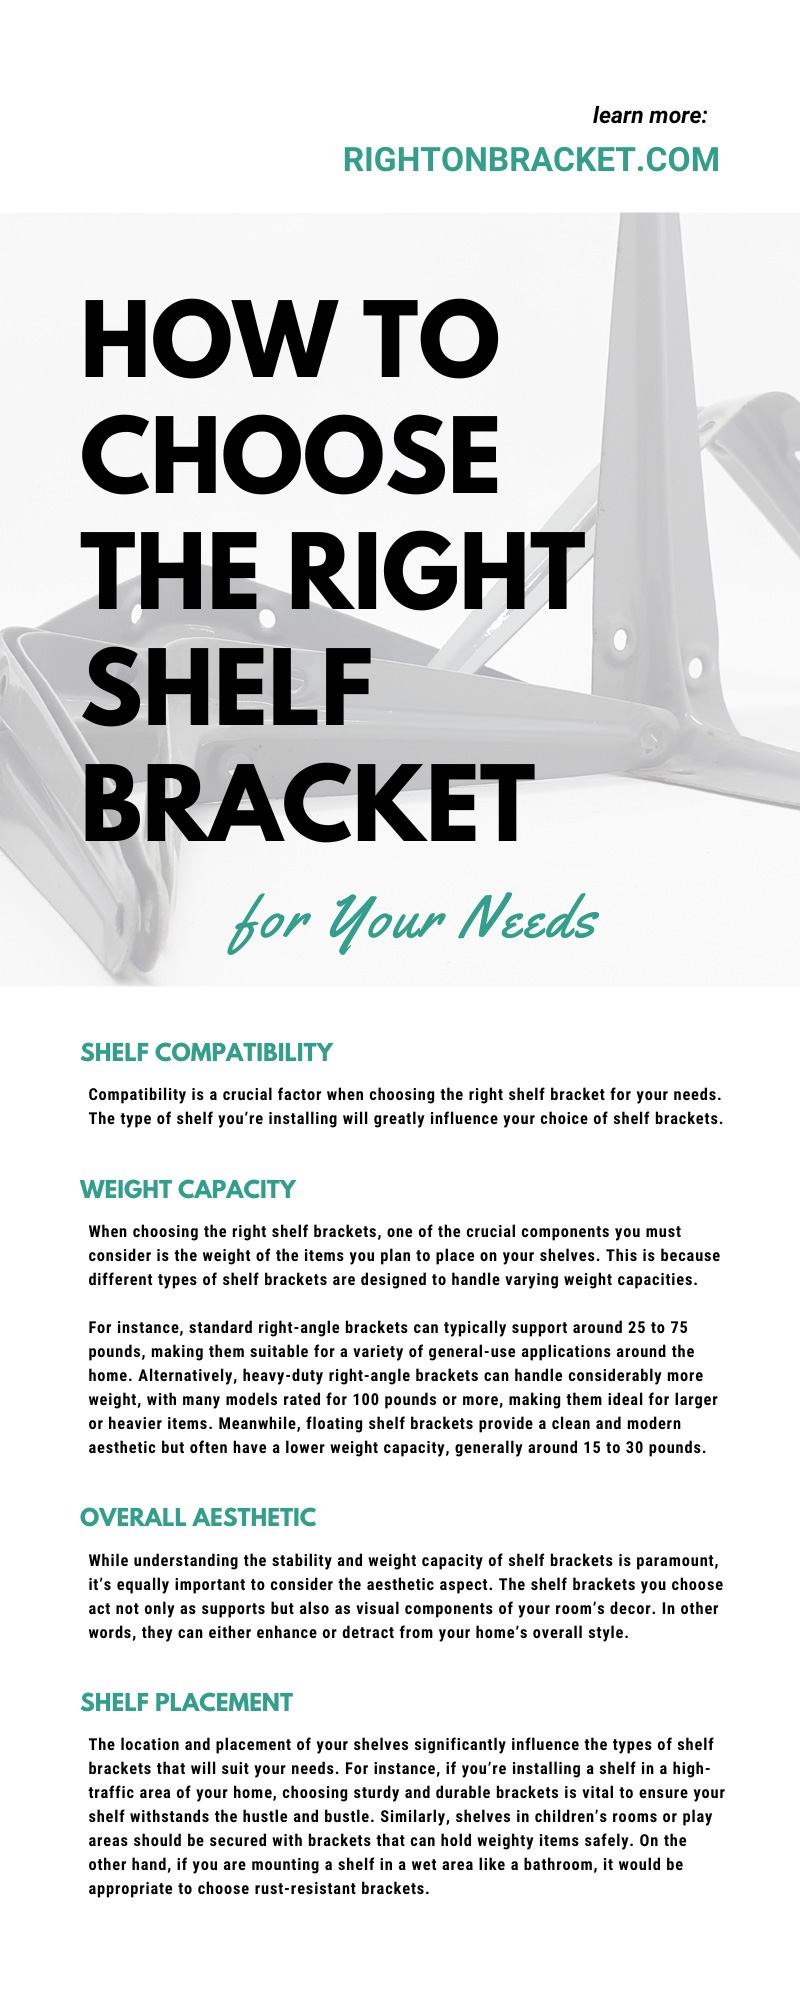 How To Choose the Right Shelf Bracket for Your Needs
